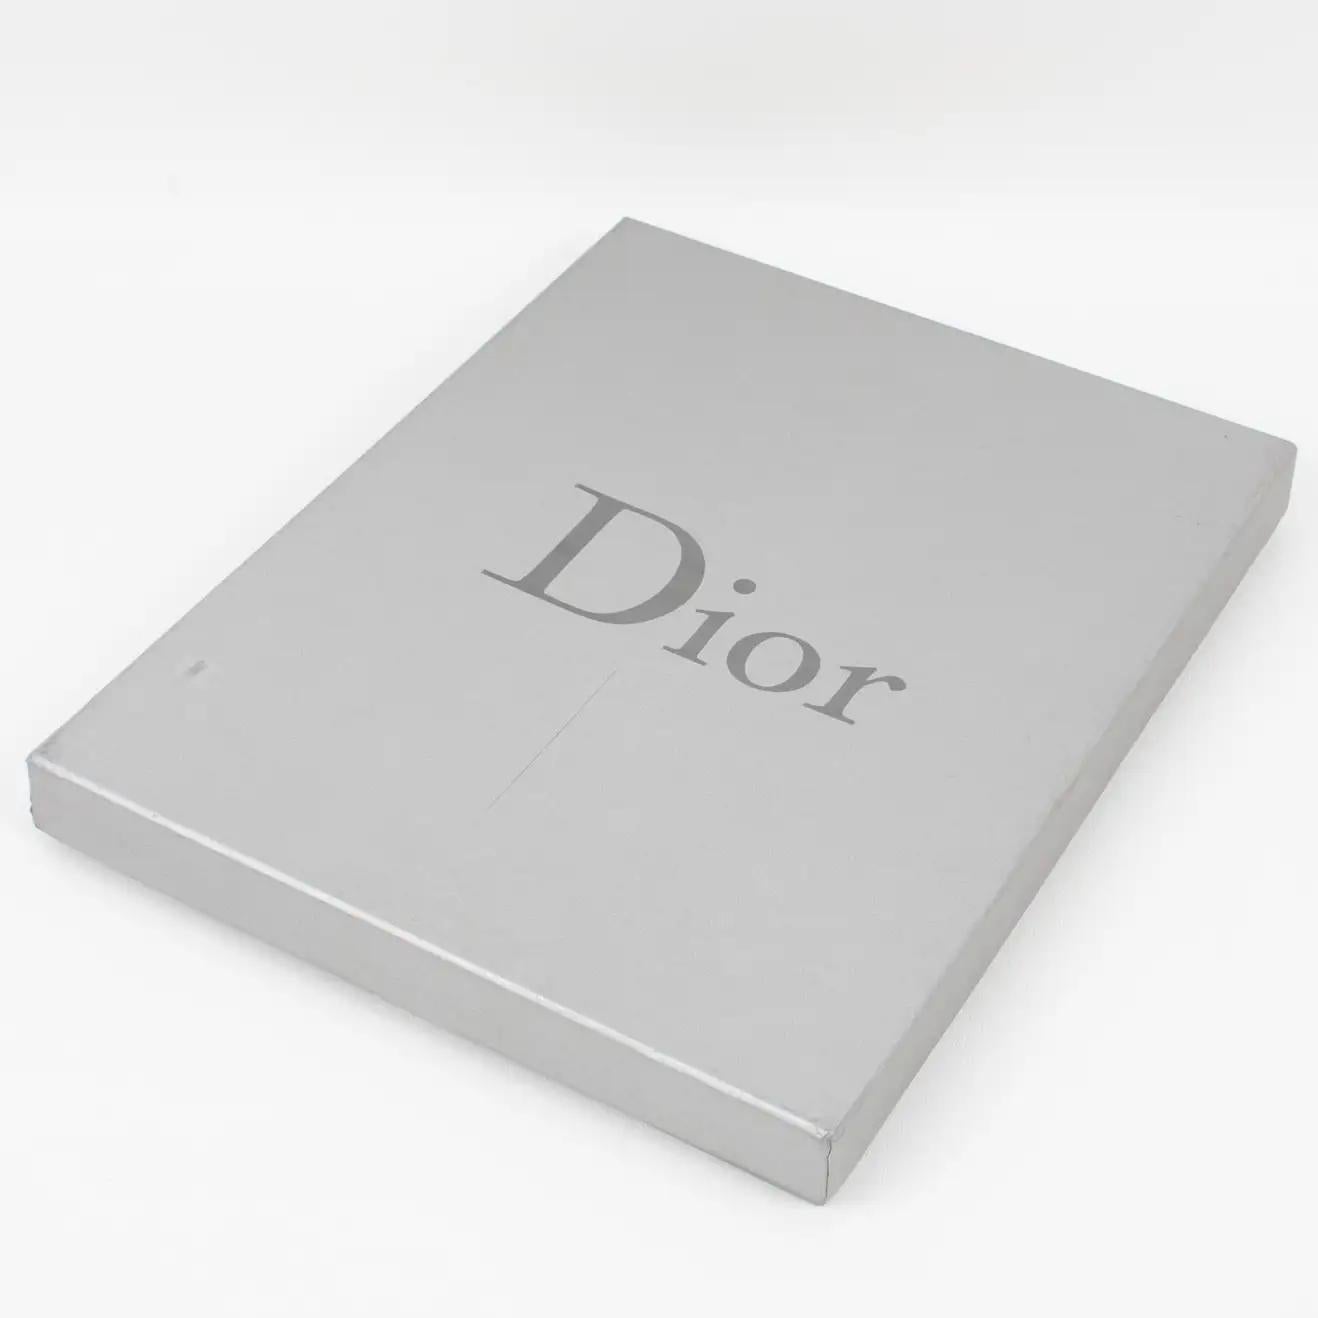 Christian Dior Paris Silver Plate Picture Frame with Engraved Logo, in Box For Sale 1